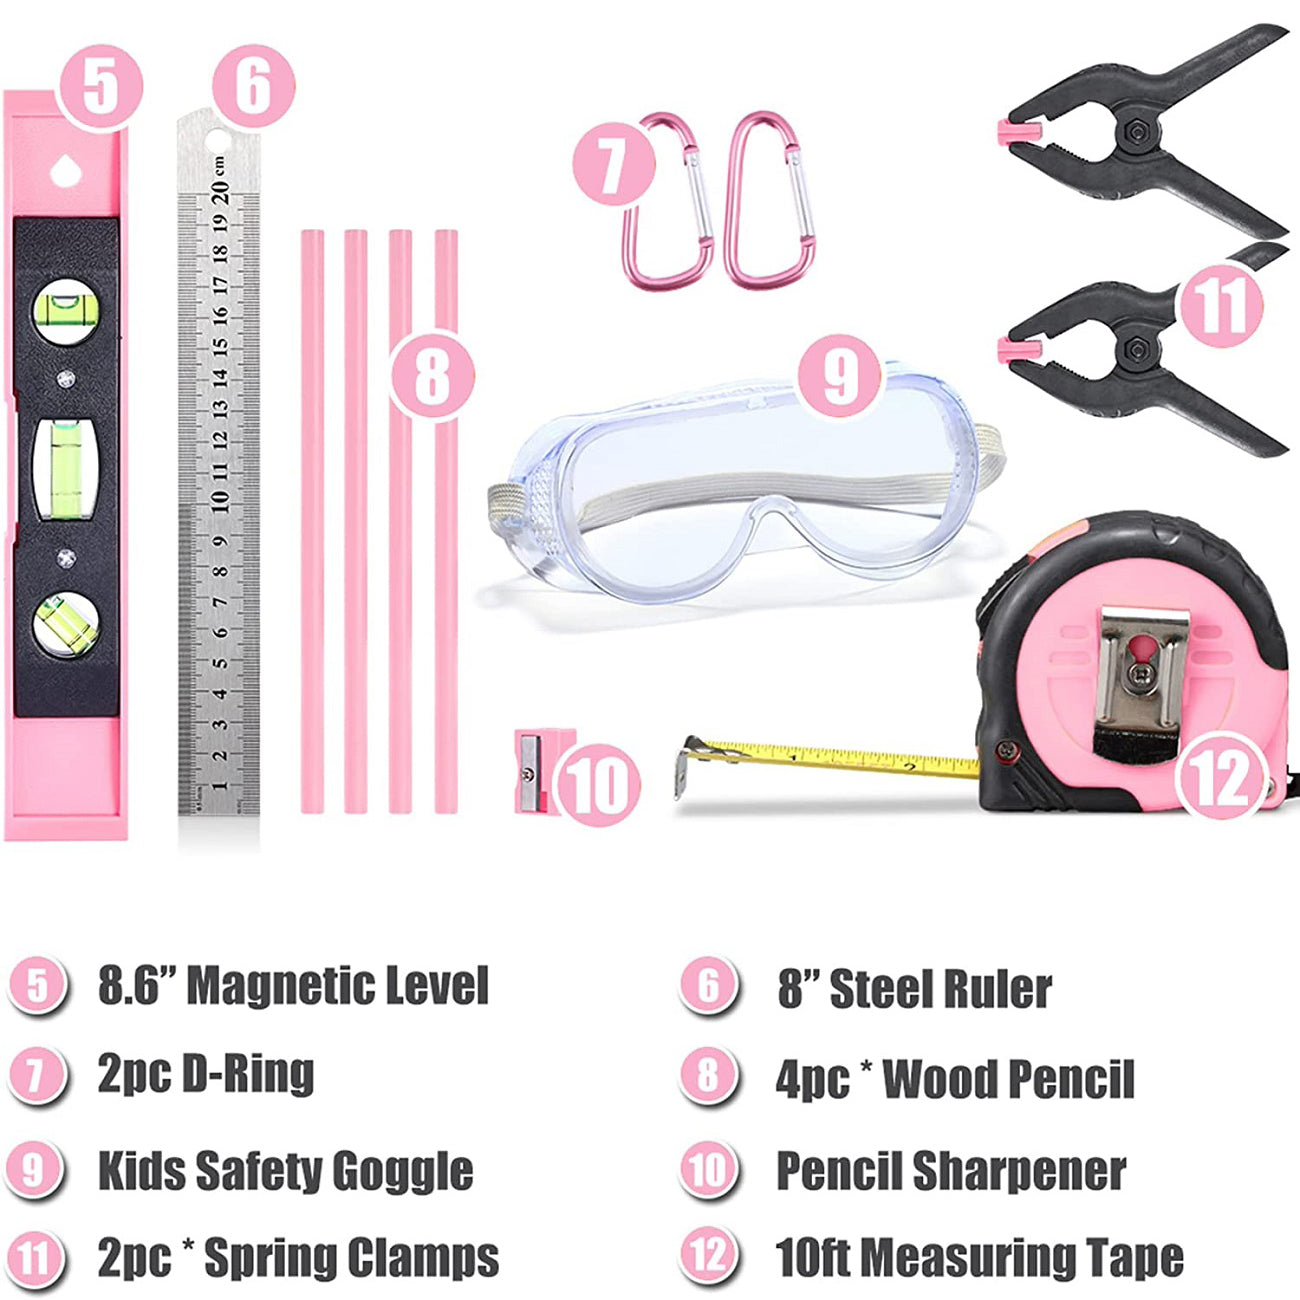 REXBETI 18pcs Young Builder's Tool Set with Real Hand Tools, Reinforced  Kids Tool Belt, Waist 20-32, Kids Learning Tool Kit for Home DIY and